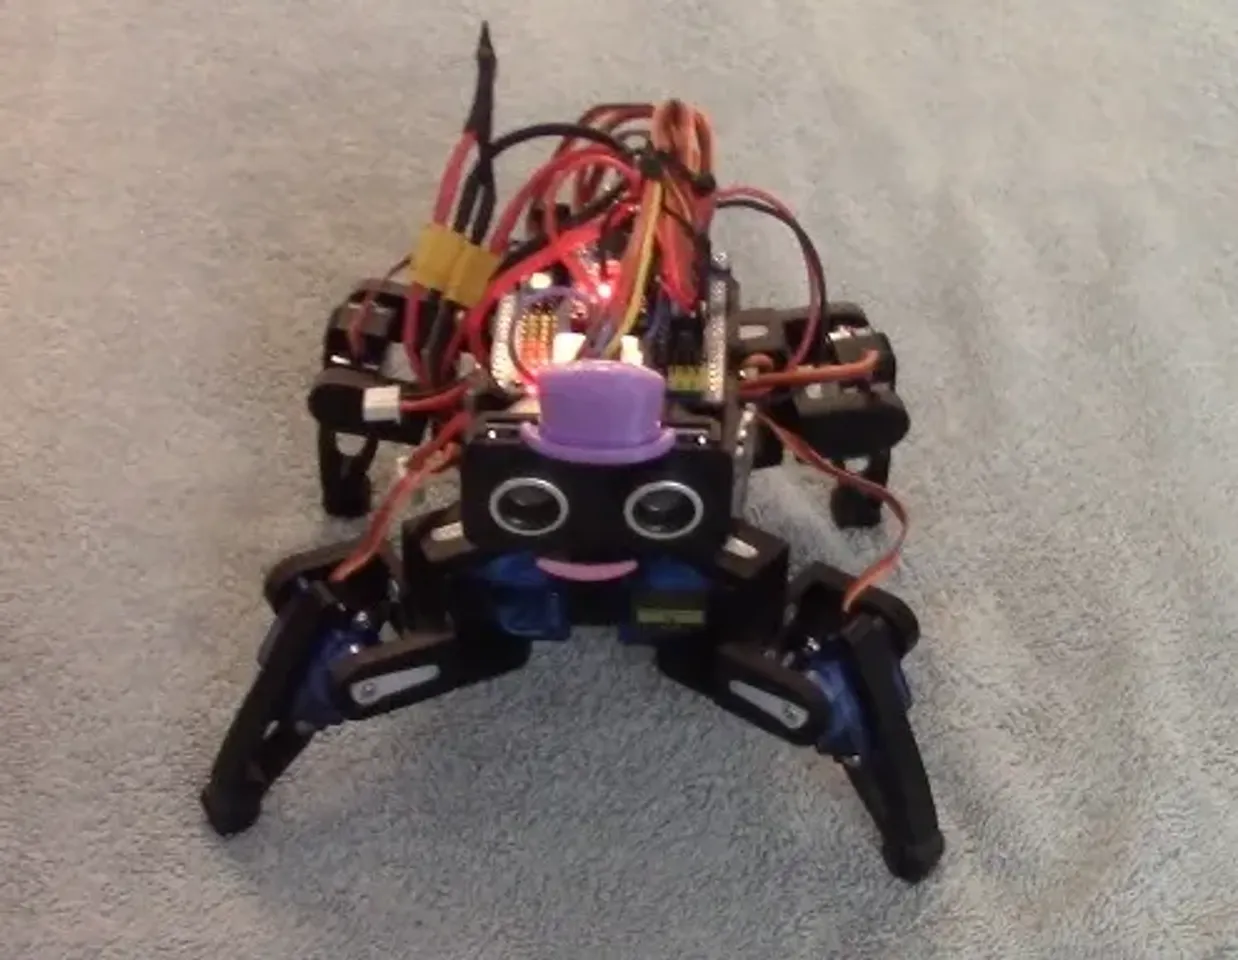 Arduino Based 4-Legged Mobile Robot Built From Scratch - M5Stack Projects